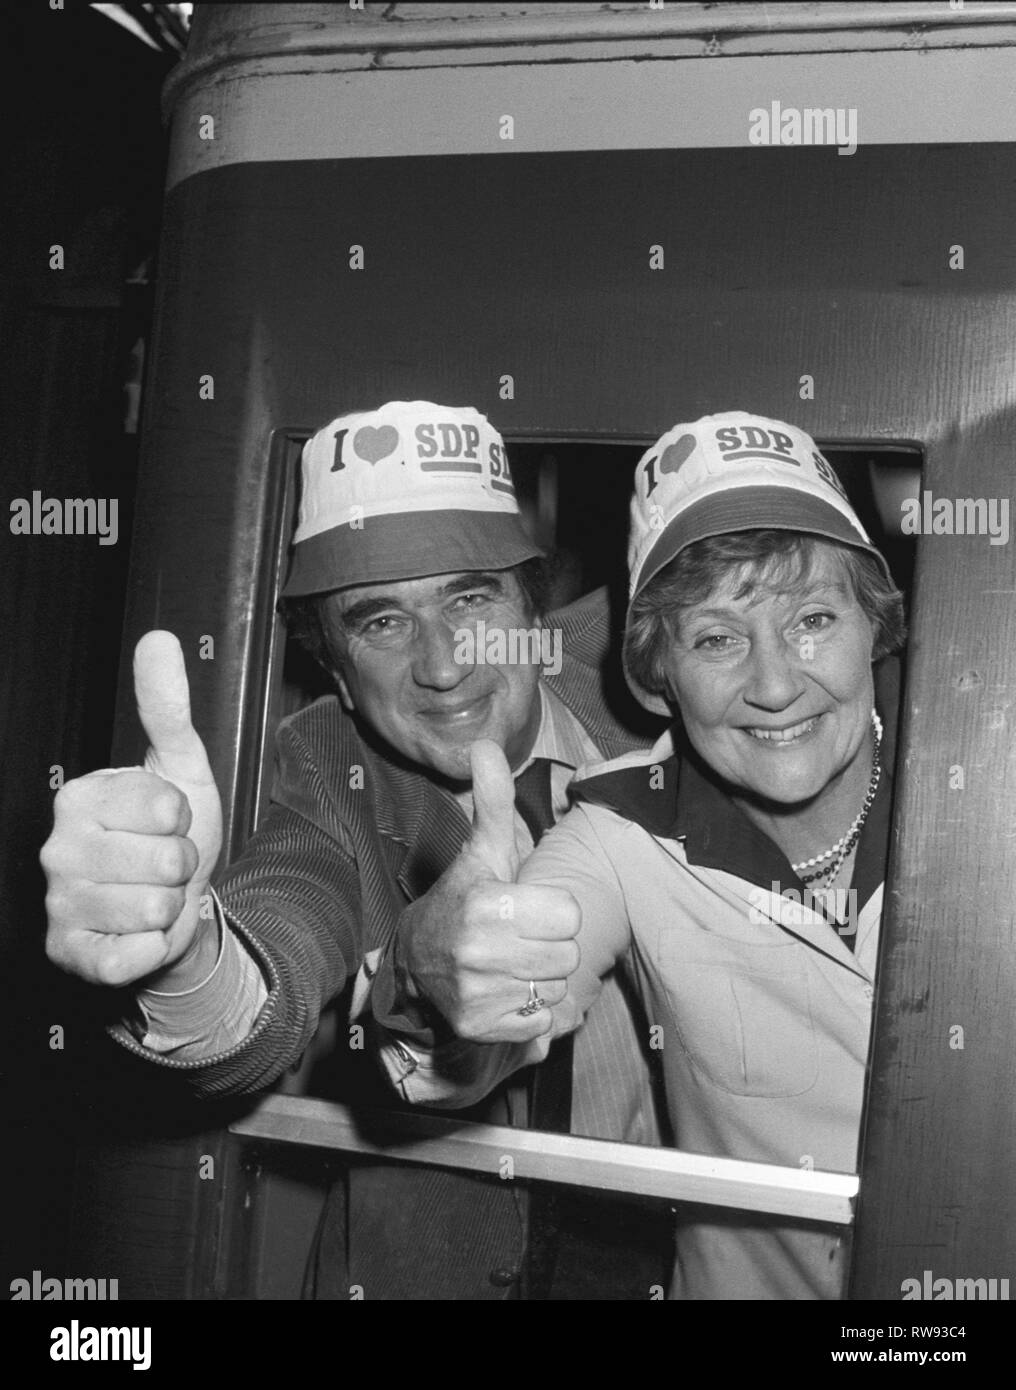 Social Democratic Party leaders Shirley Williams and Bill Rodgers wearing 'I love the SDP' hats aboard their train at Paddington Station bound for Torquay and their annual party conference. Stock Photo